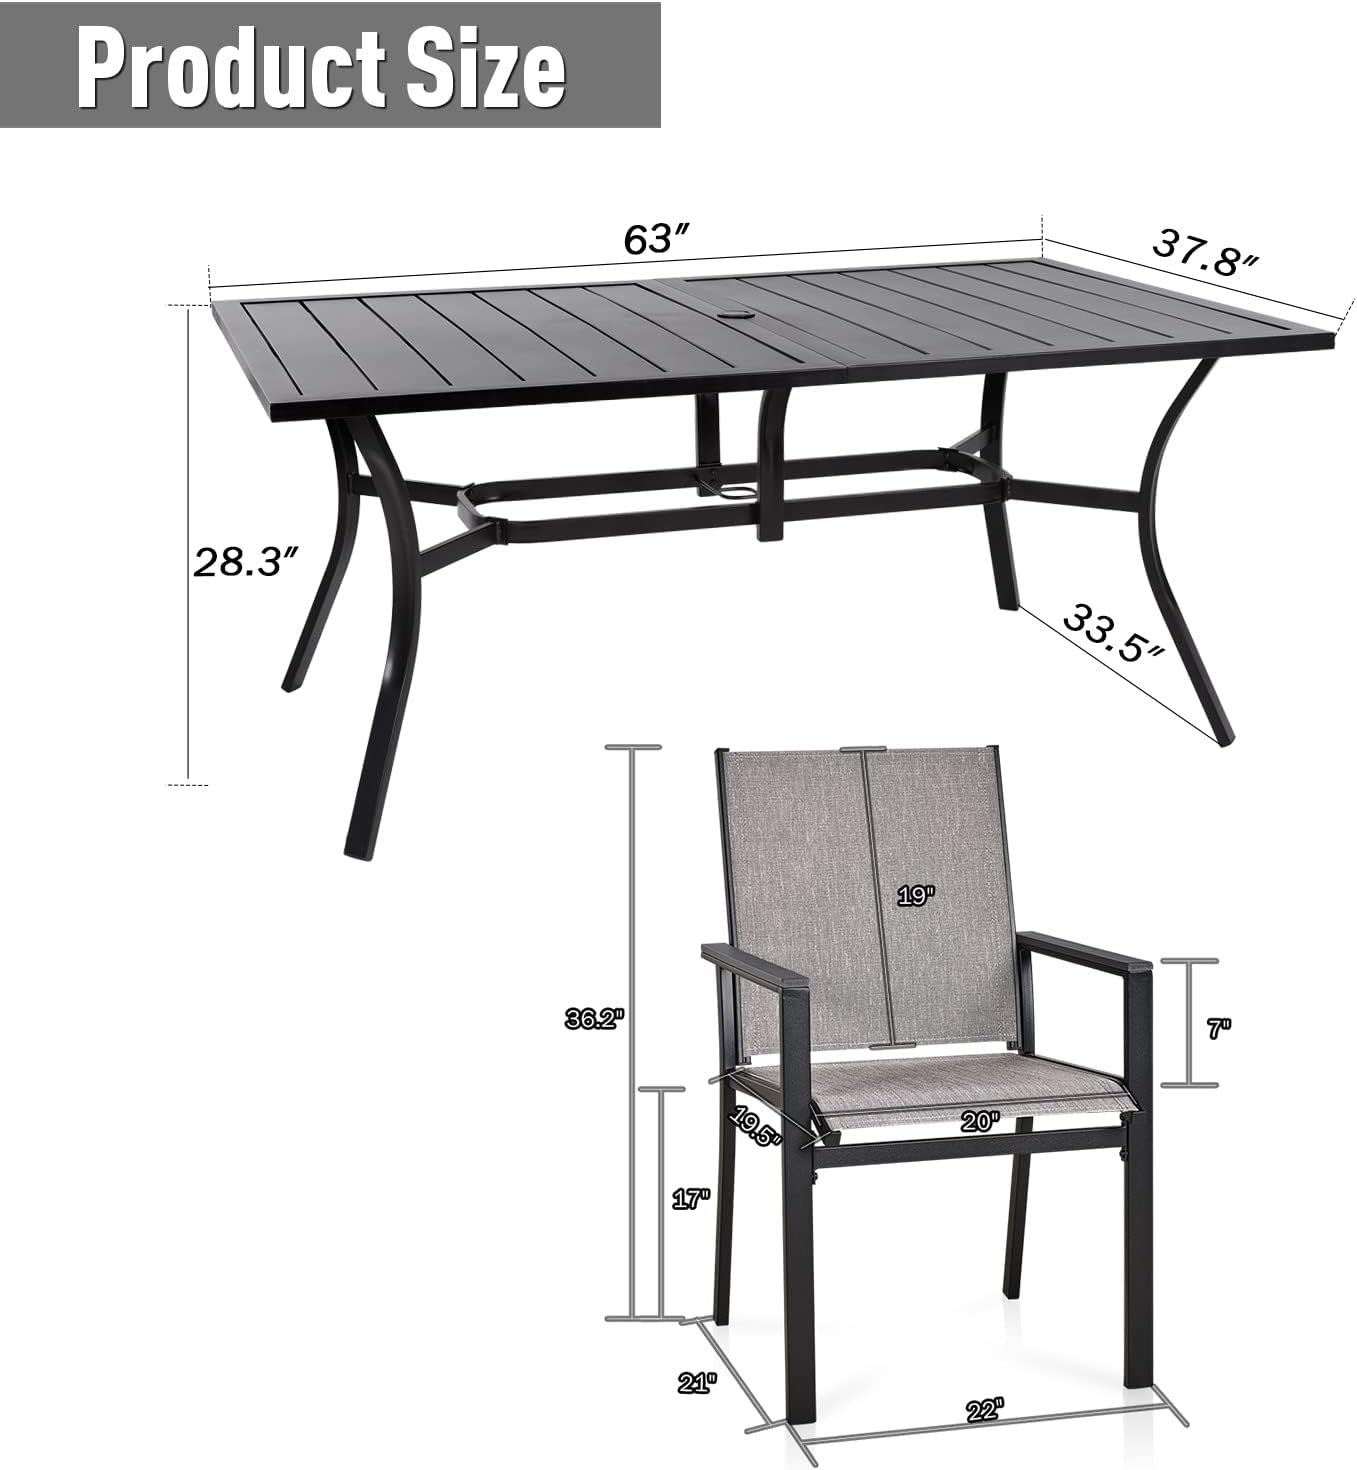 7-piece Patio Dining Set, 6 Outdoor Chairs & Square Metal Table (1.57" Umbrella Hole)